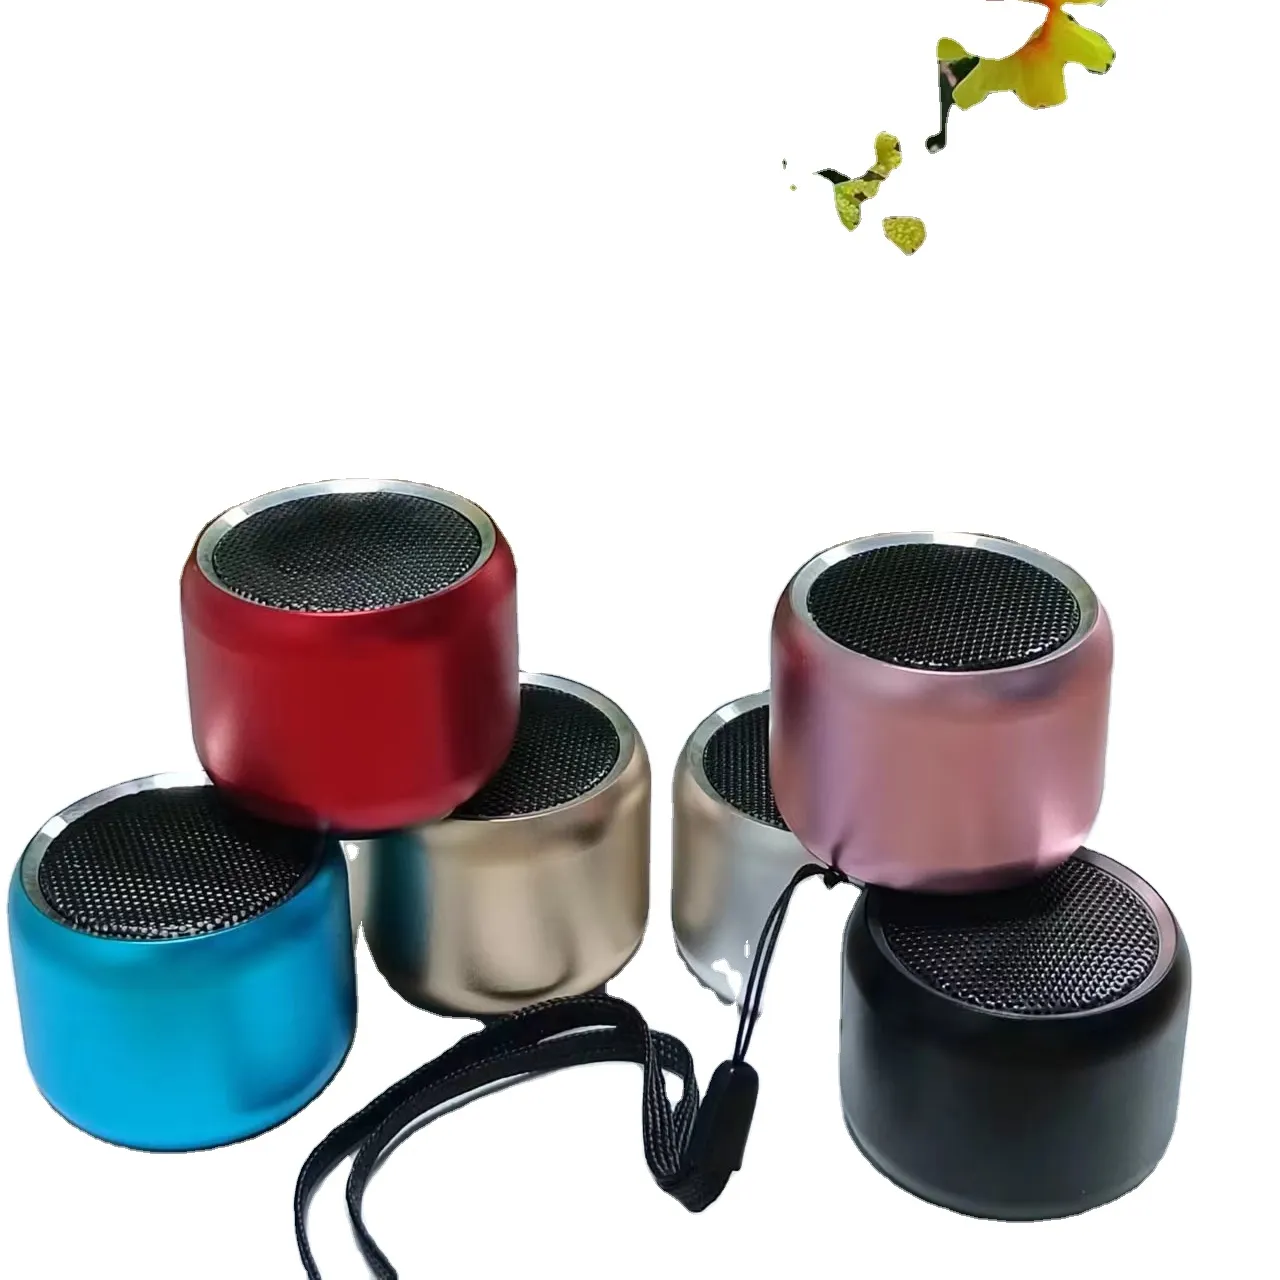 Wireless Portable Bluetooth Speaker Compact and Mini for iPhone iPad Smartphone